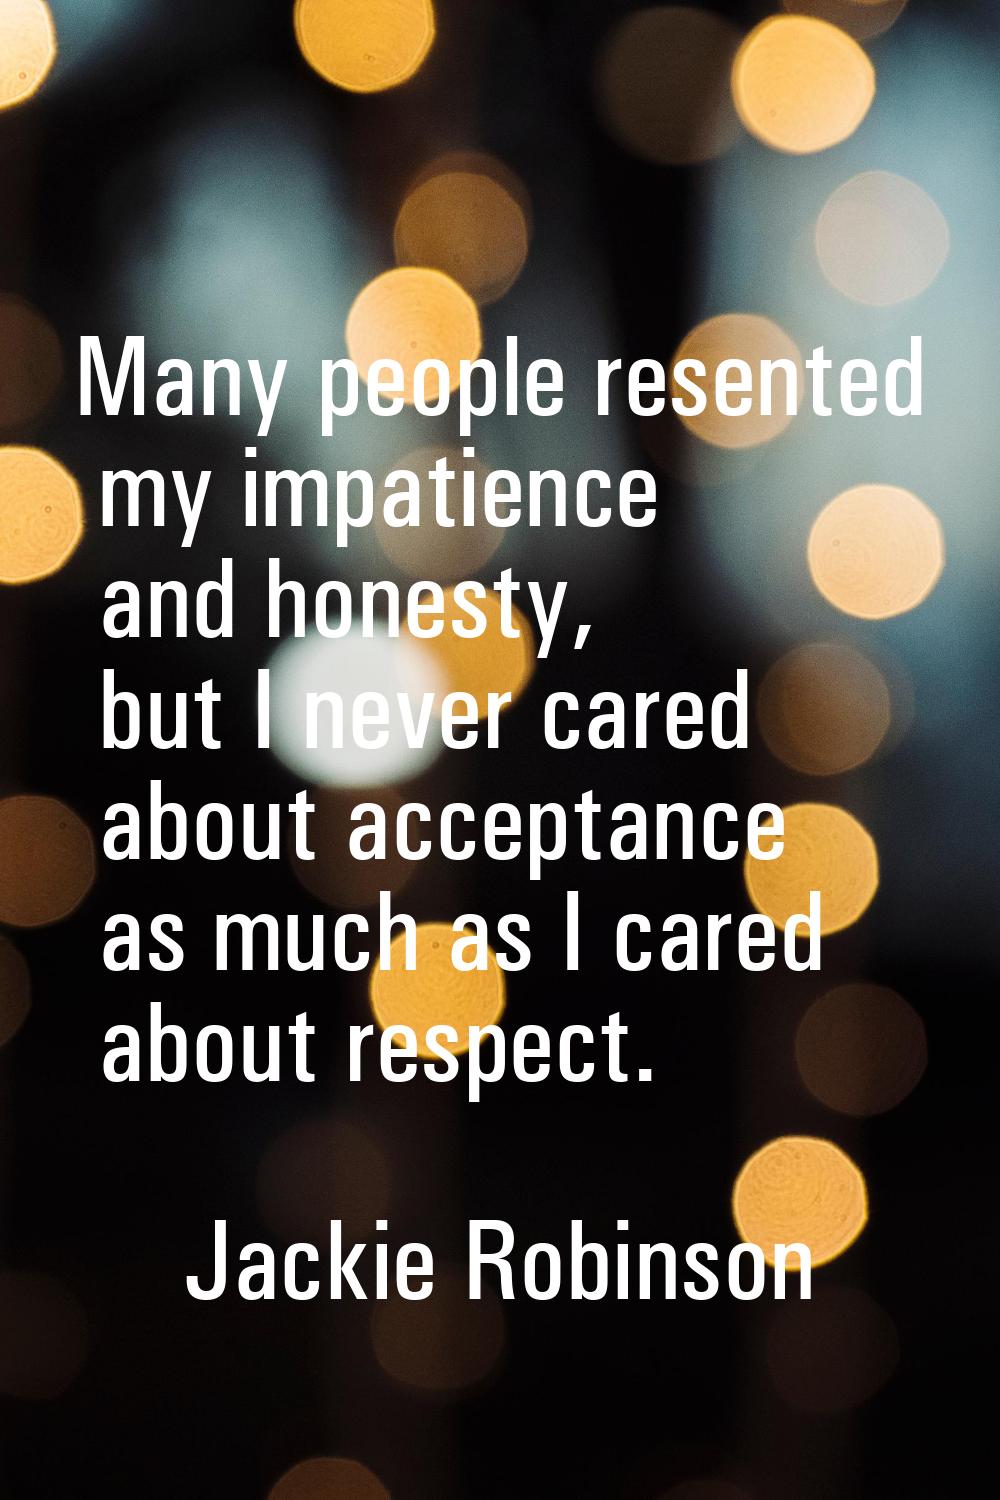 Many people resented my impatience and honesty, but I never cared about acceptance as much as I car